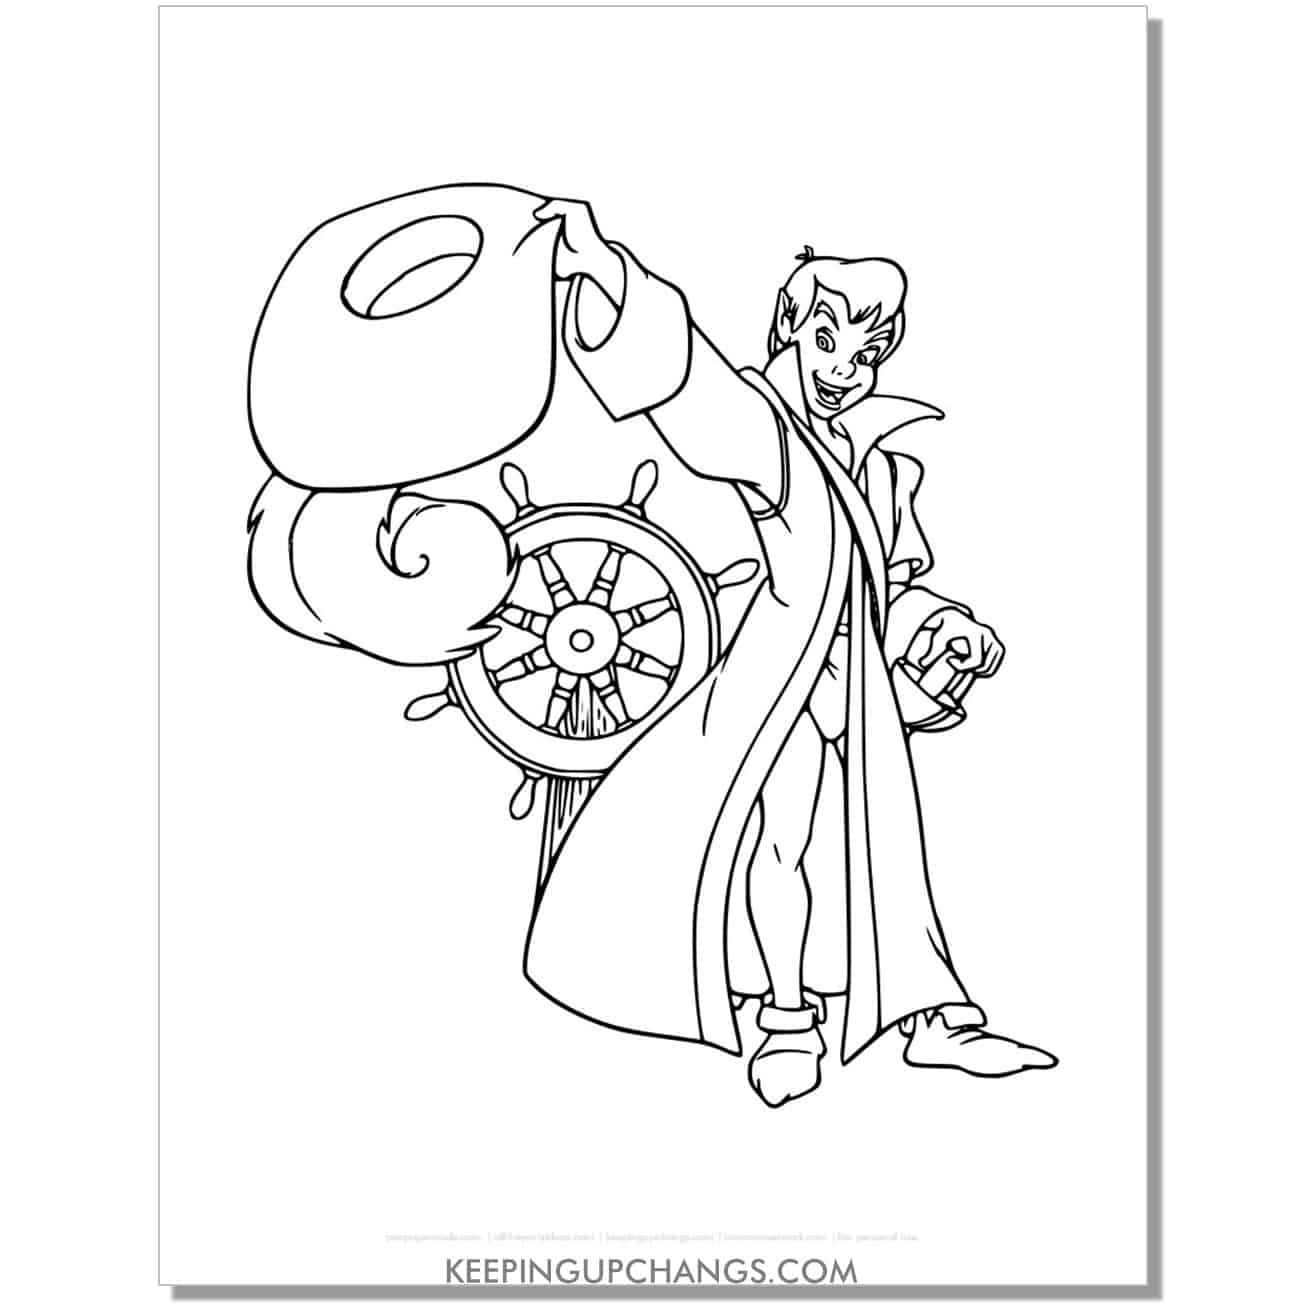 peter pan wear's captain hook's coat and hat coloring page, sheet.